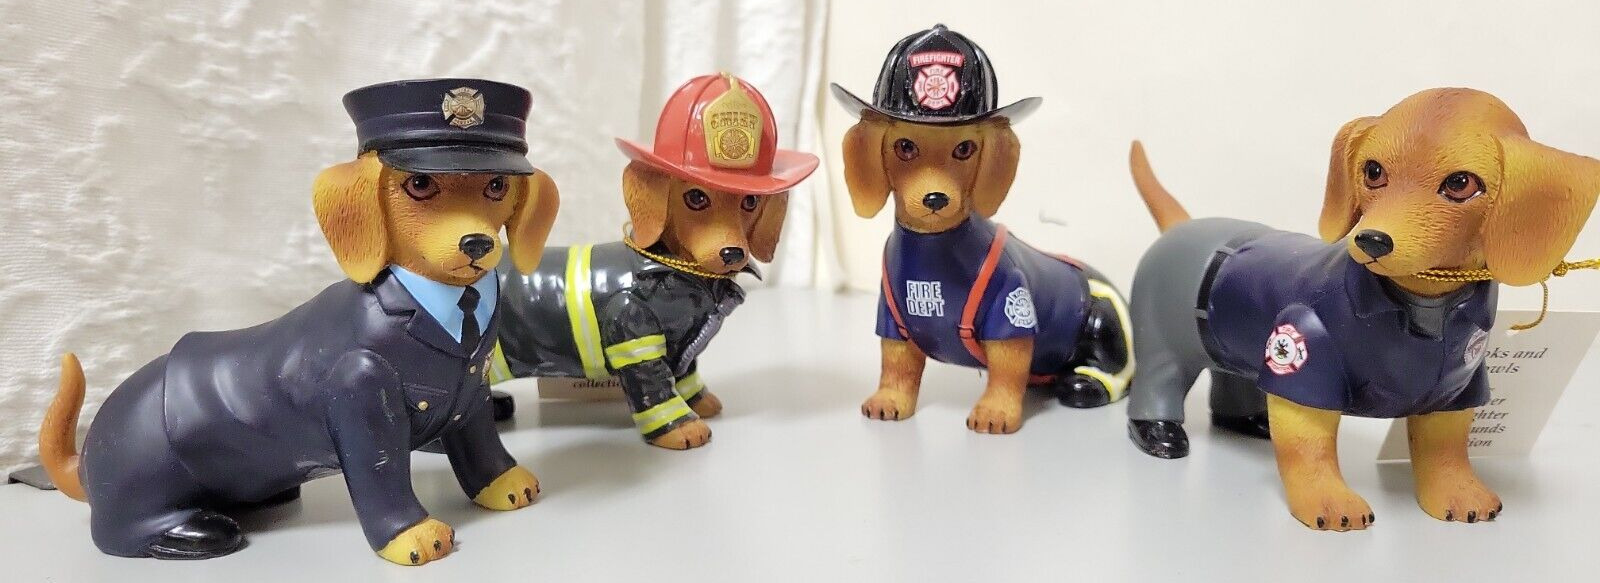 Lot of 4 DACHSHUNDs HAMILTON COLLECTION Fur-ever Firefighter Dogs - Complete Set